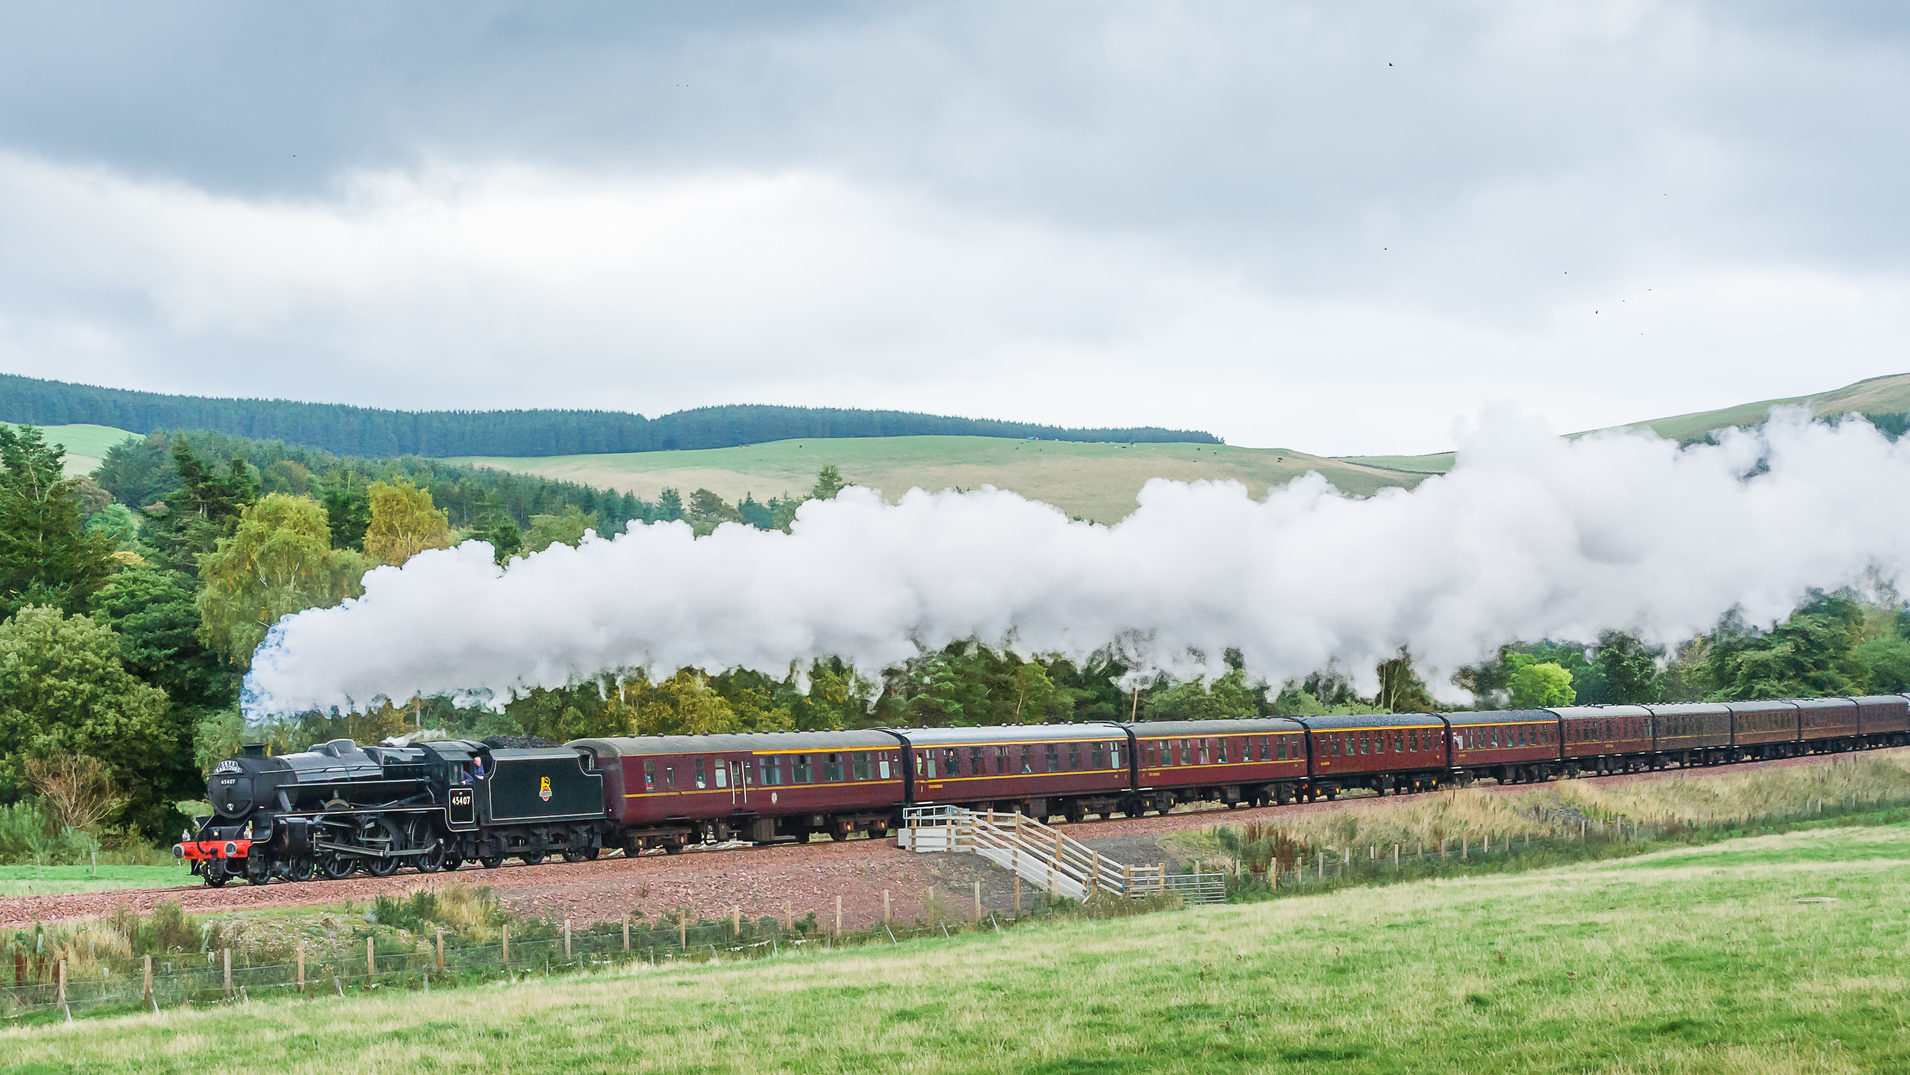 A Black Five Steam Train, The Lancashire Fusilier, travelling along the Borders Railway.